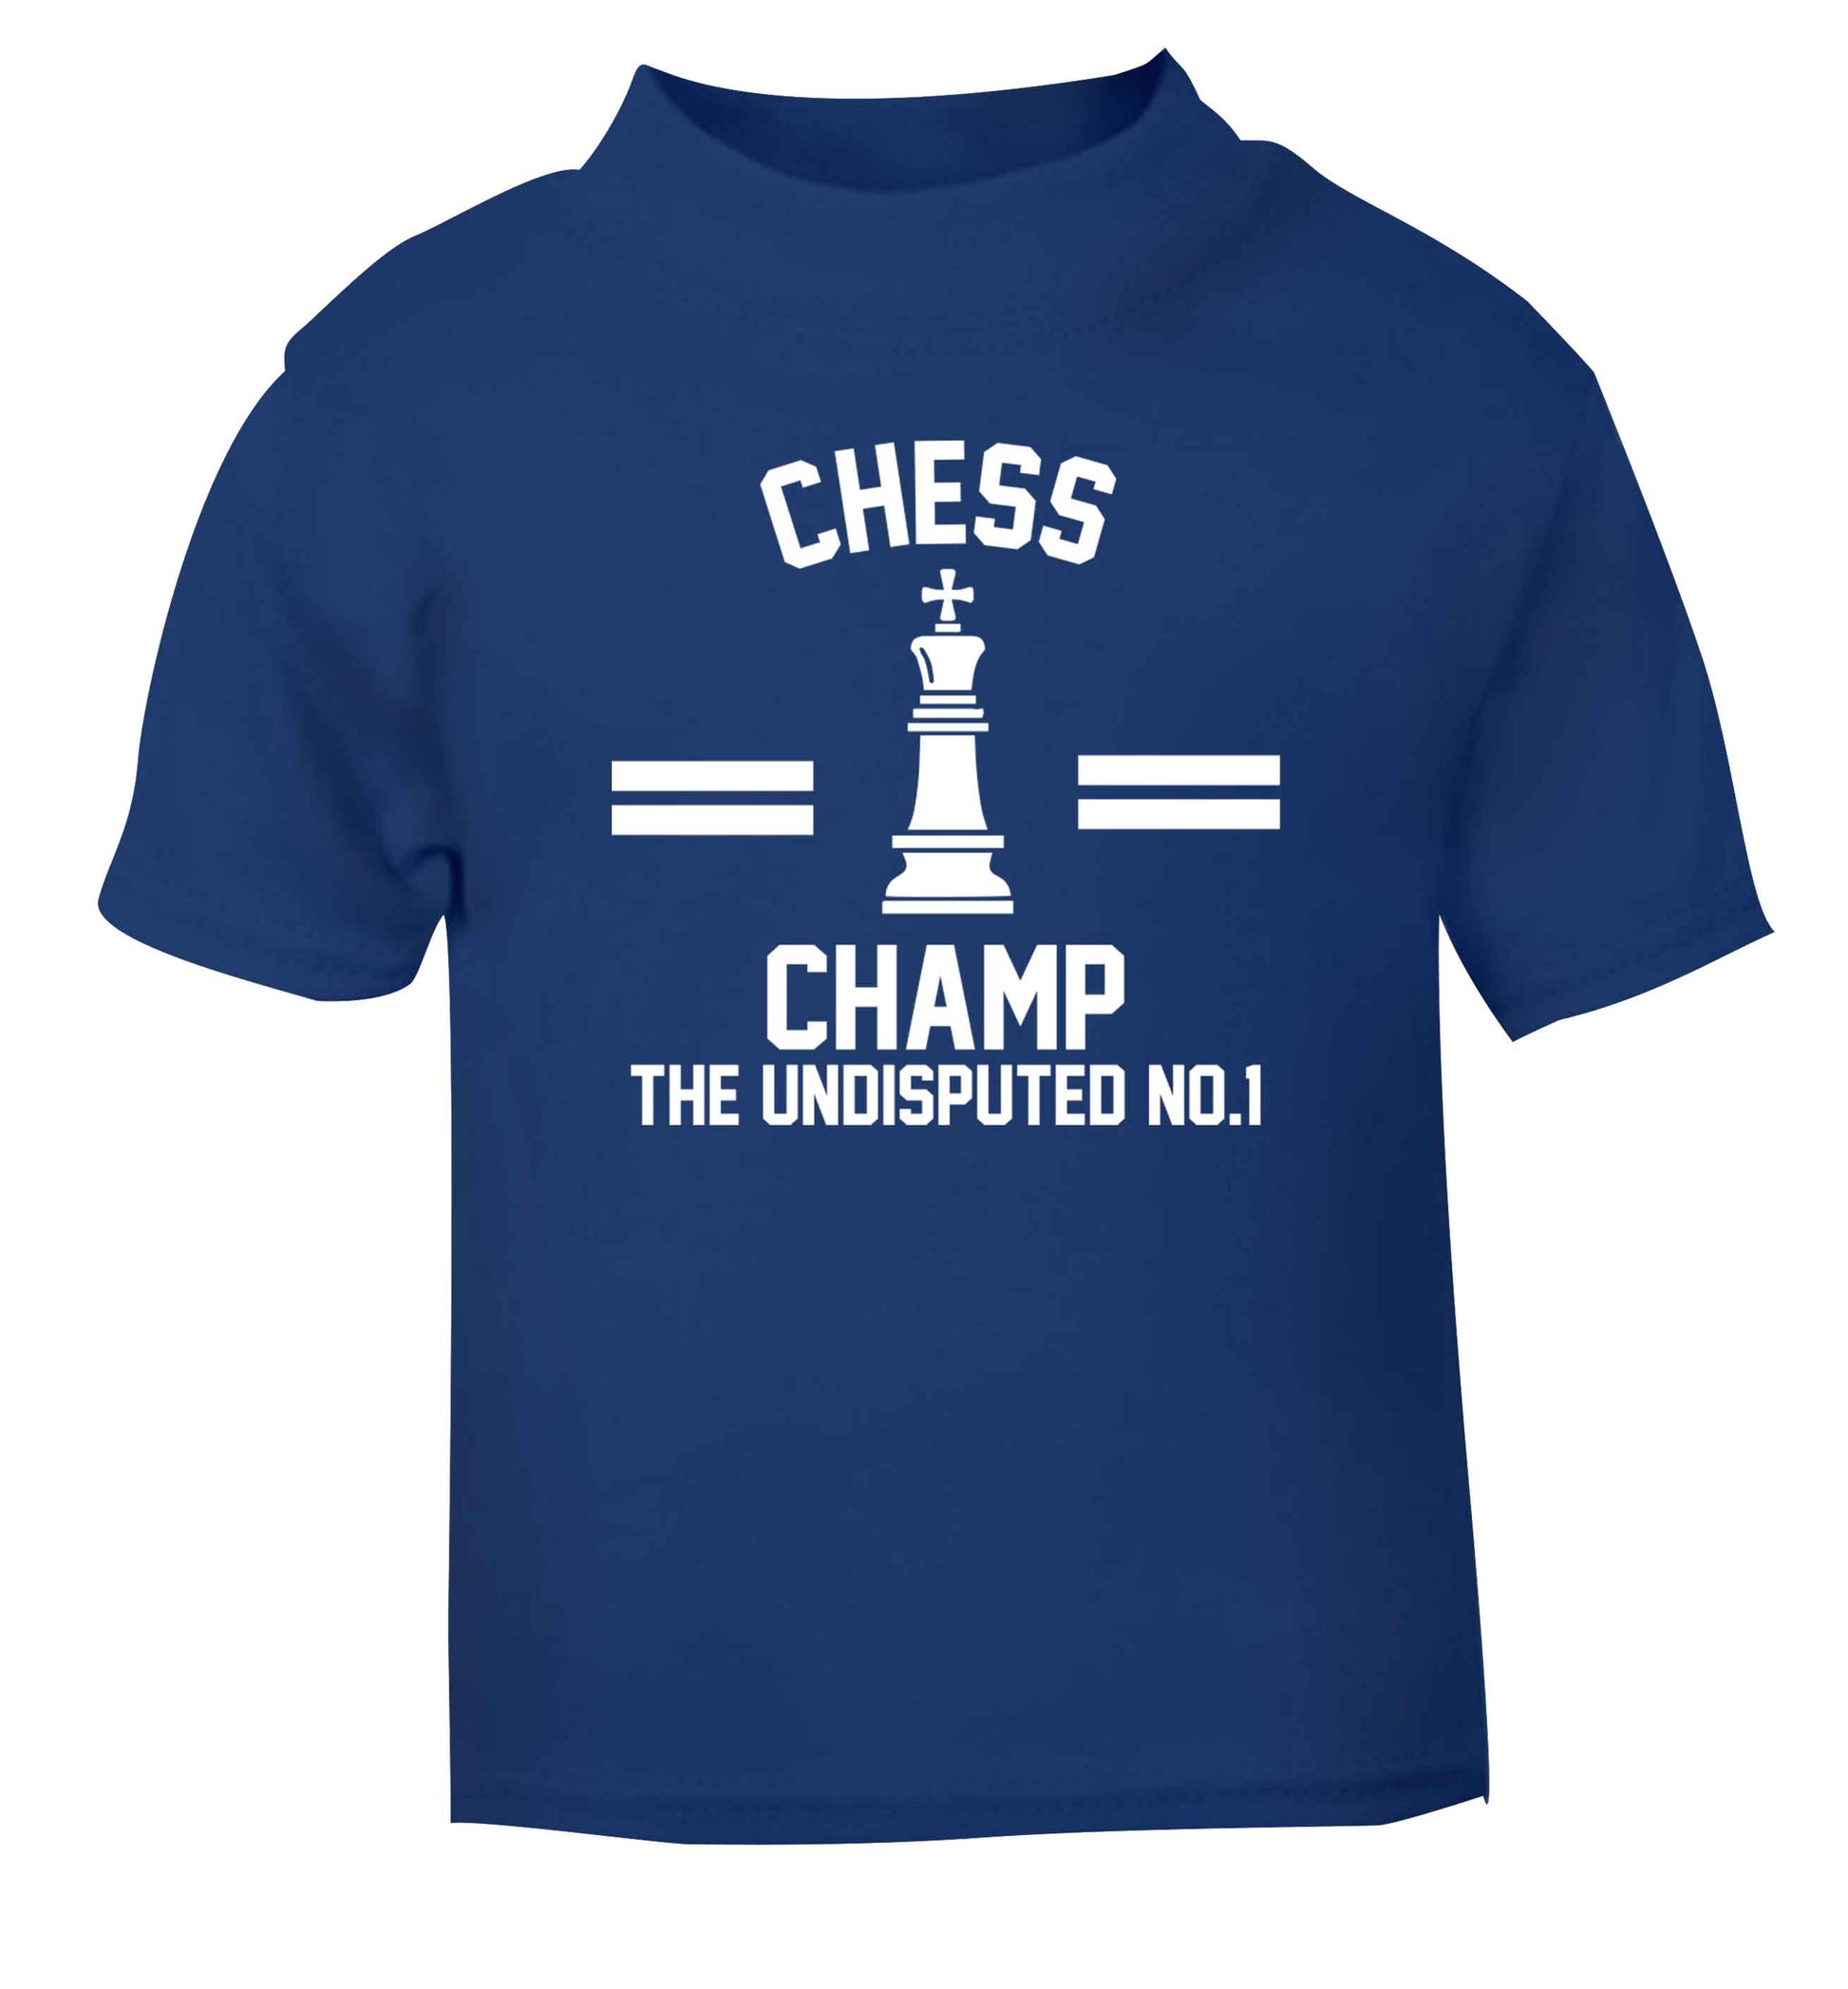 Undisputed chess championship no.1  blue Baby Toddler Tshirt 2 Years